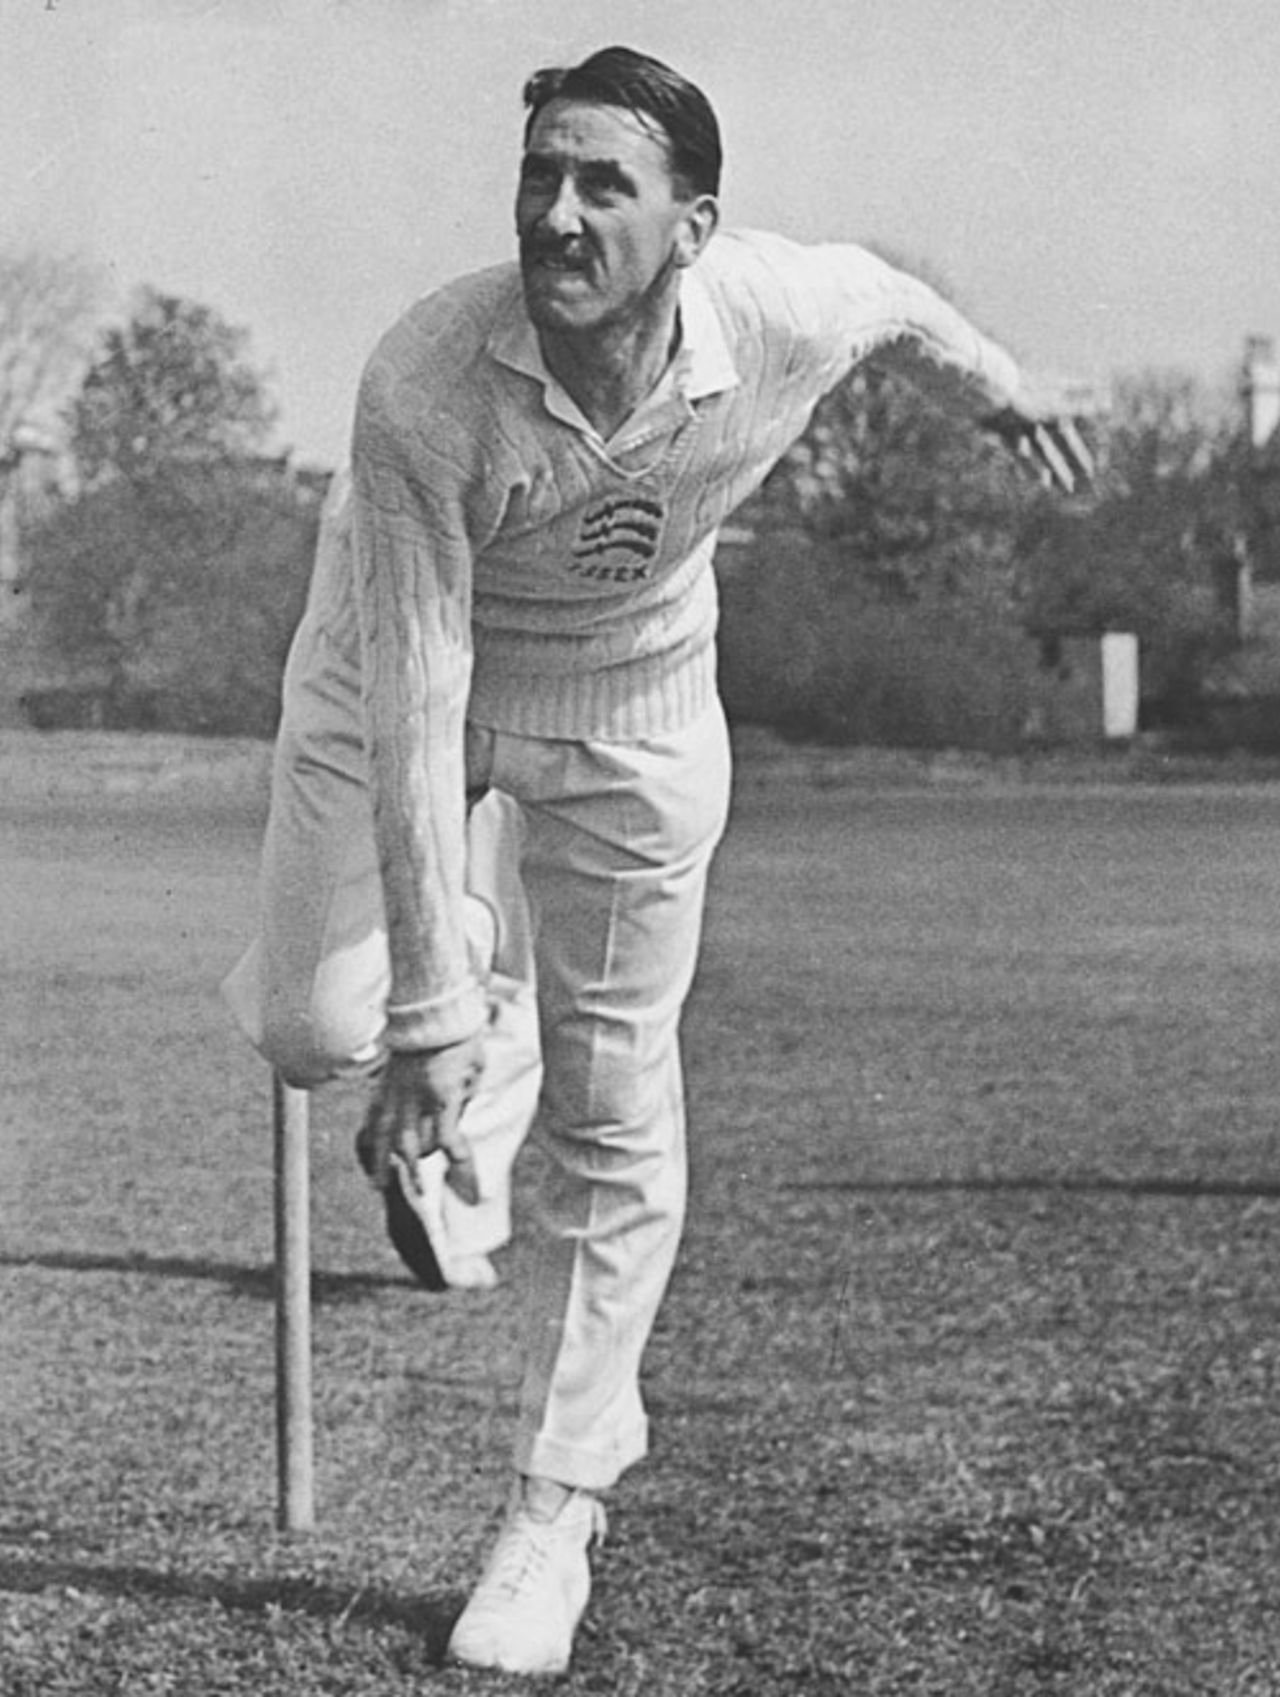 Essex legspinner Frank Vigar bowls in the nets, 1950